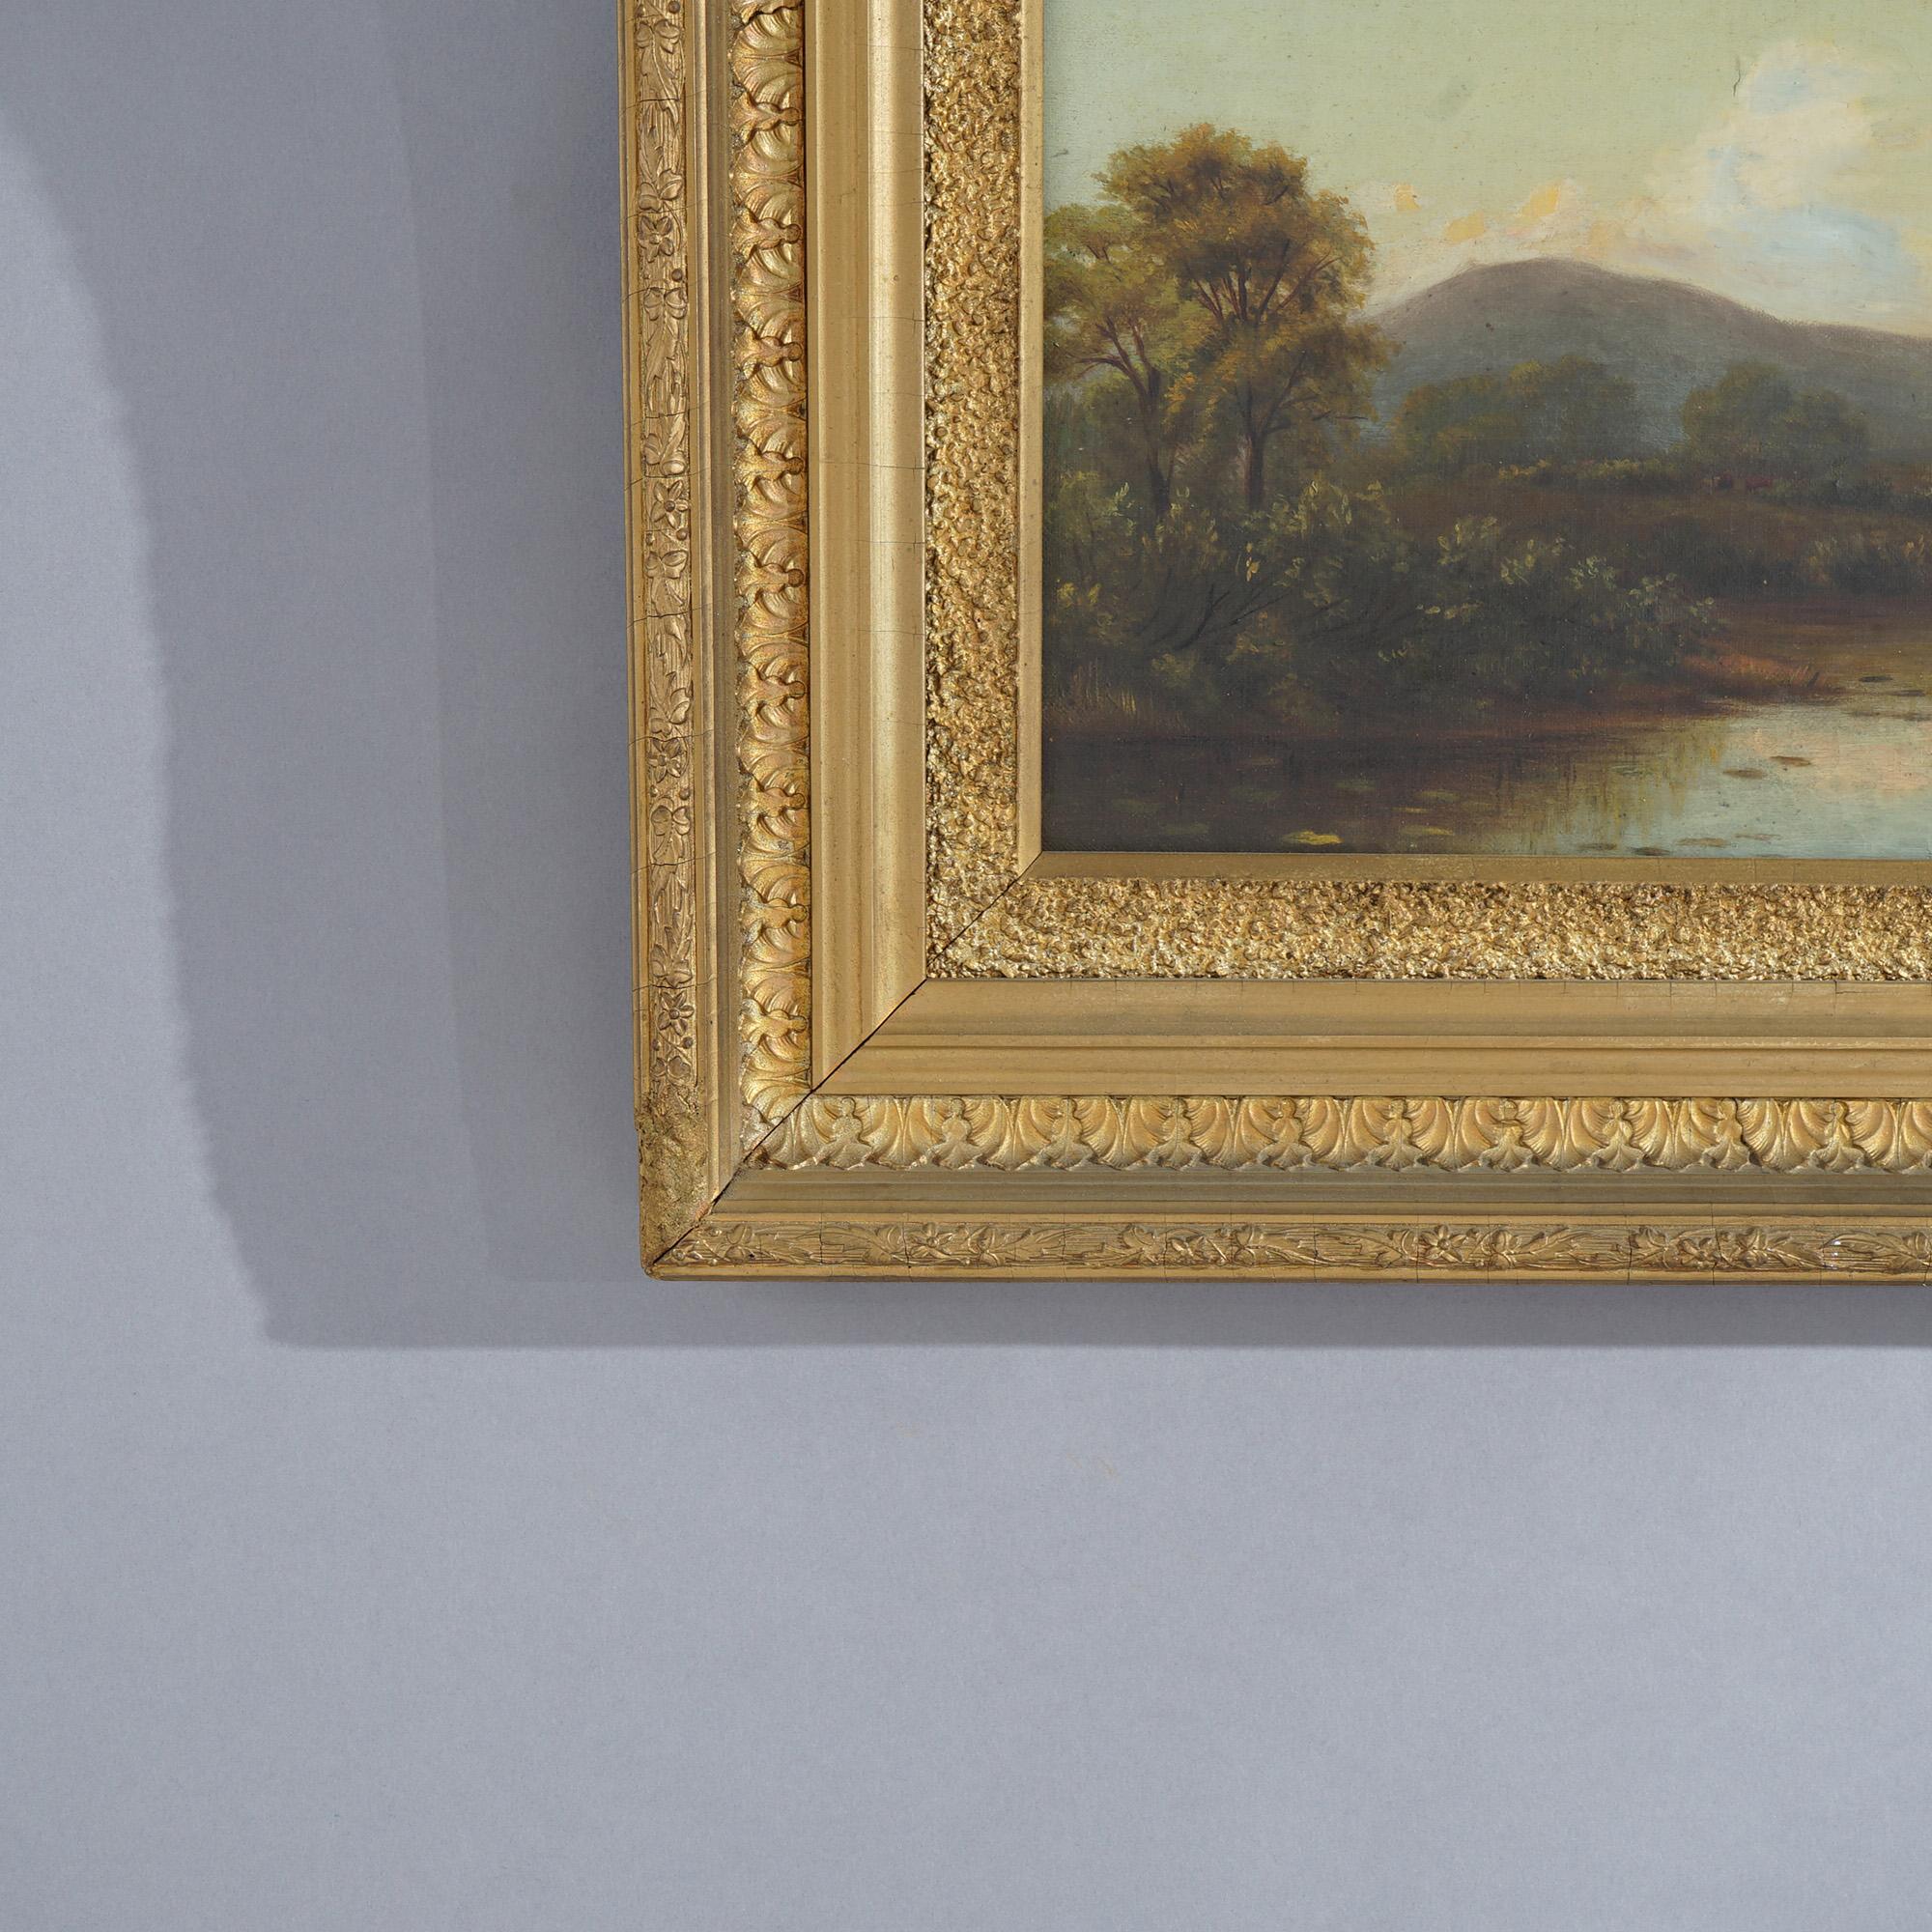 Antique Hudson River School Landscape Painting with Cattle, Stream and Church 1